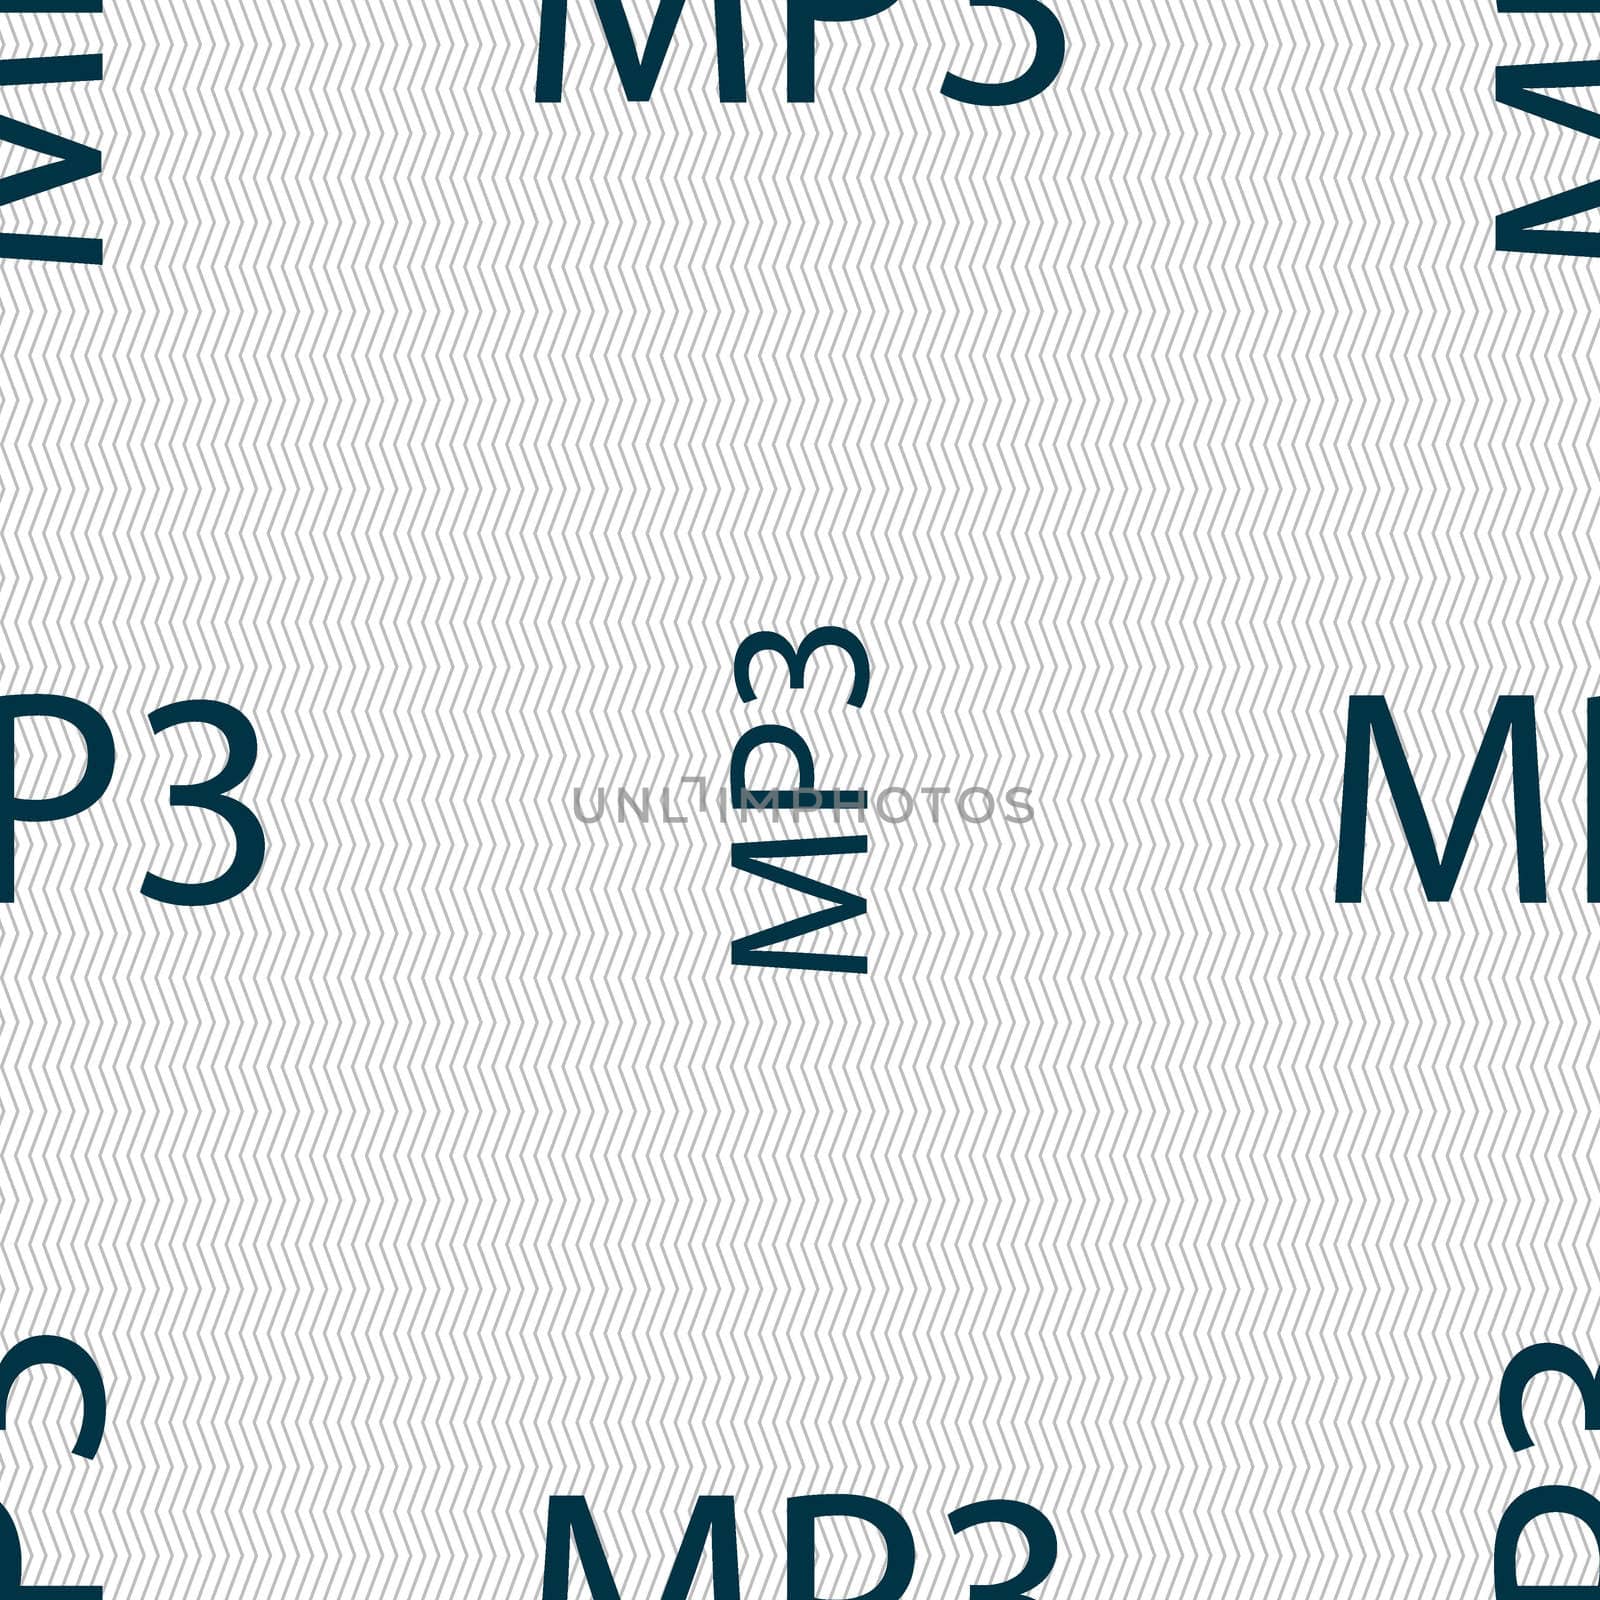 Mp3 music format sign icon. Musical symbol. Seamless abstract background with geometric shapes. illustration